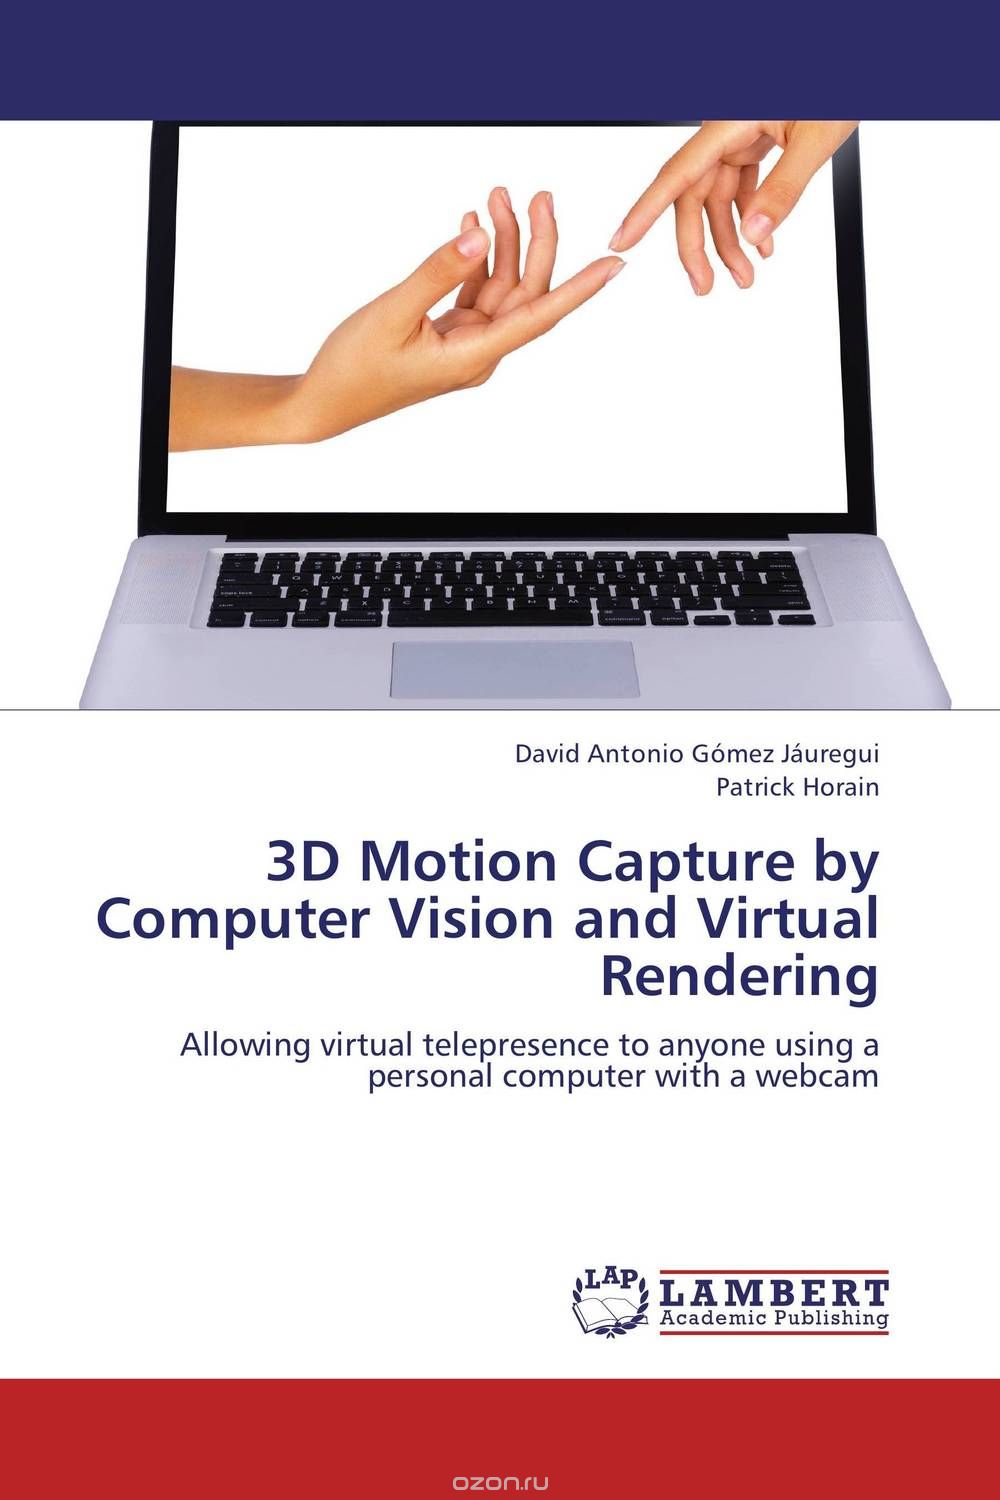 3D Motion Capture by Computer Vision and Virtual Rendering